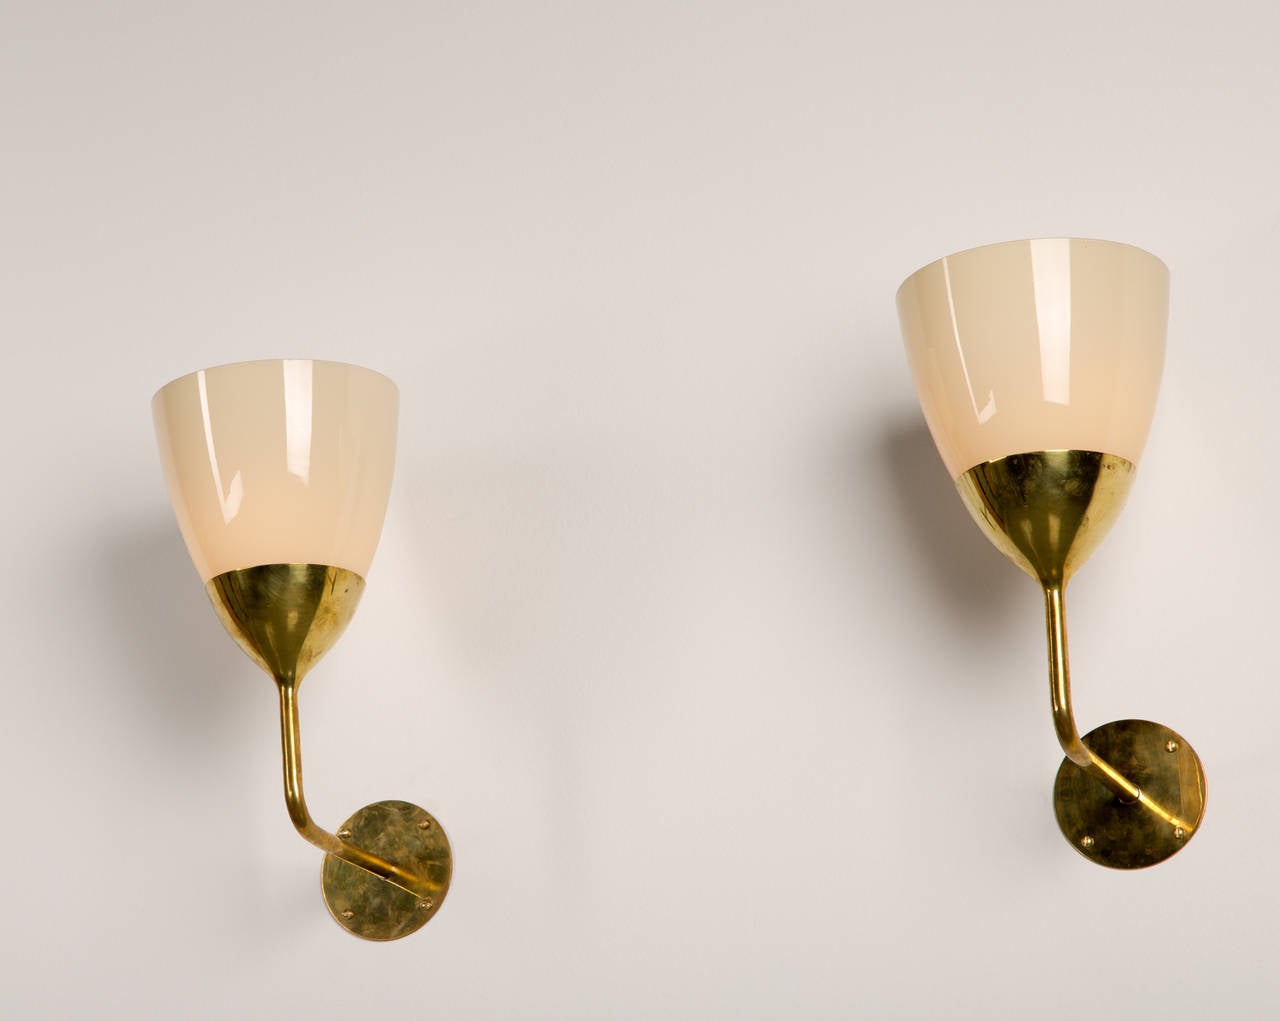 Paavo Tynell,

Sconces from the Kontiolahti Church, North Karelia.

Taito Oy,
Finland, circa 1950s.
Brass, glass.
Measures: 7 W x 14 H inches.

Custom installation pieces.